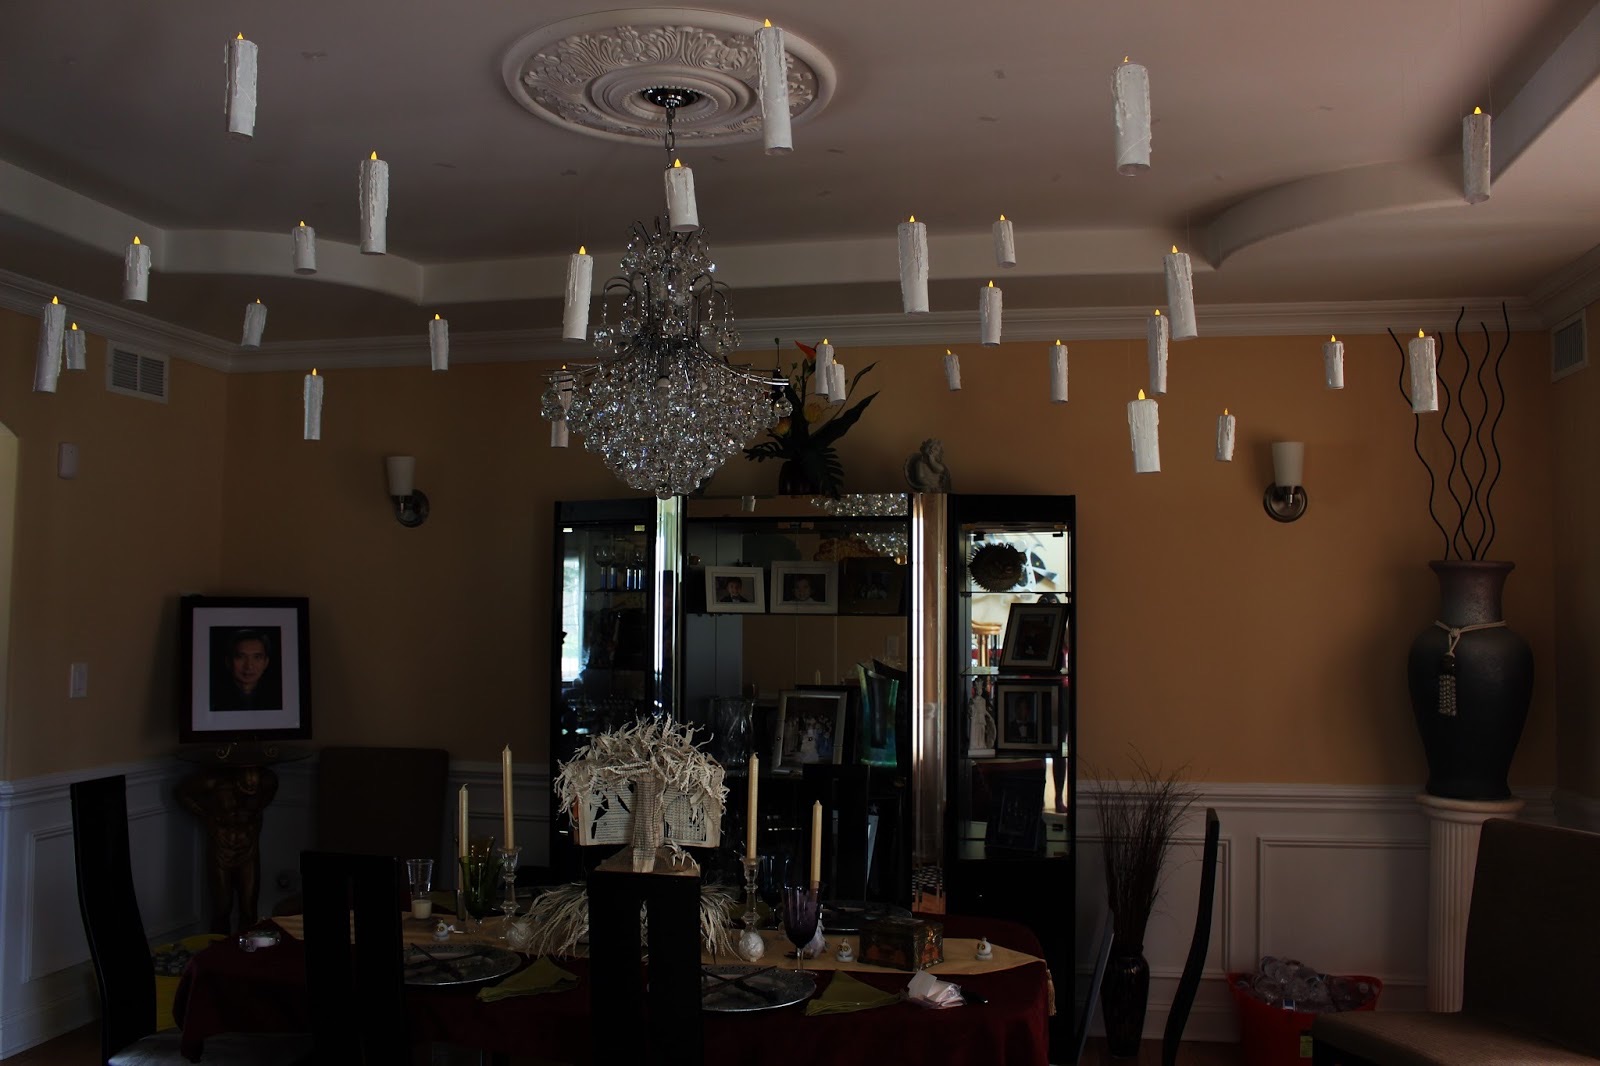 How To Hang Floating Candles From Ceiling